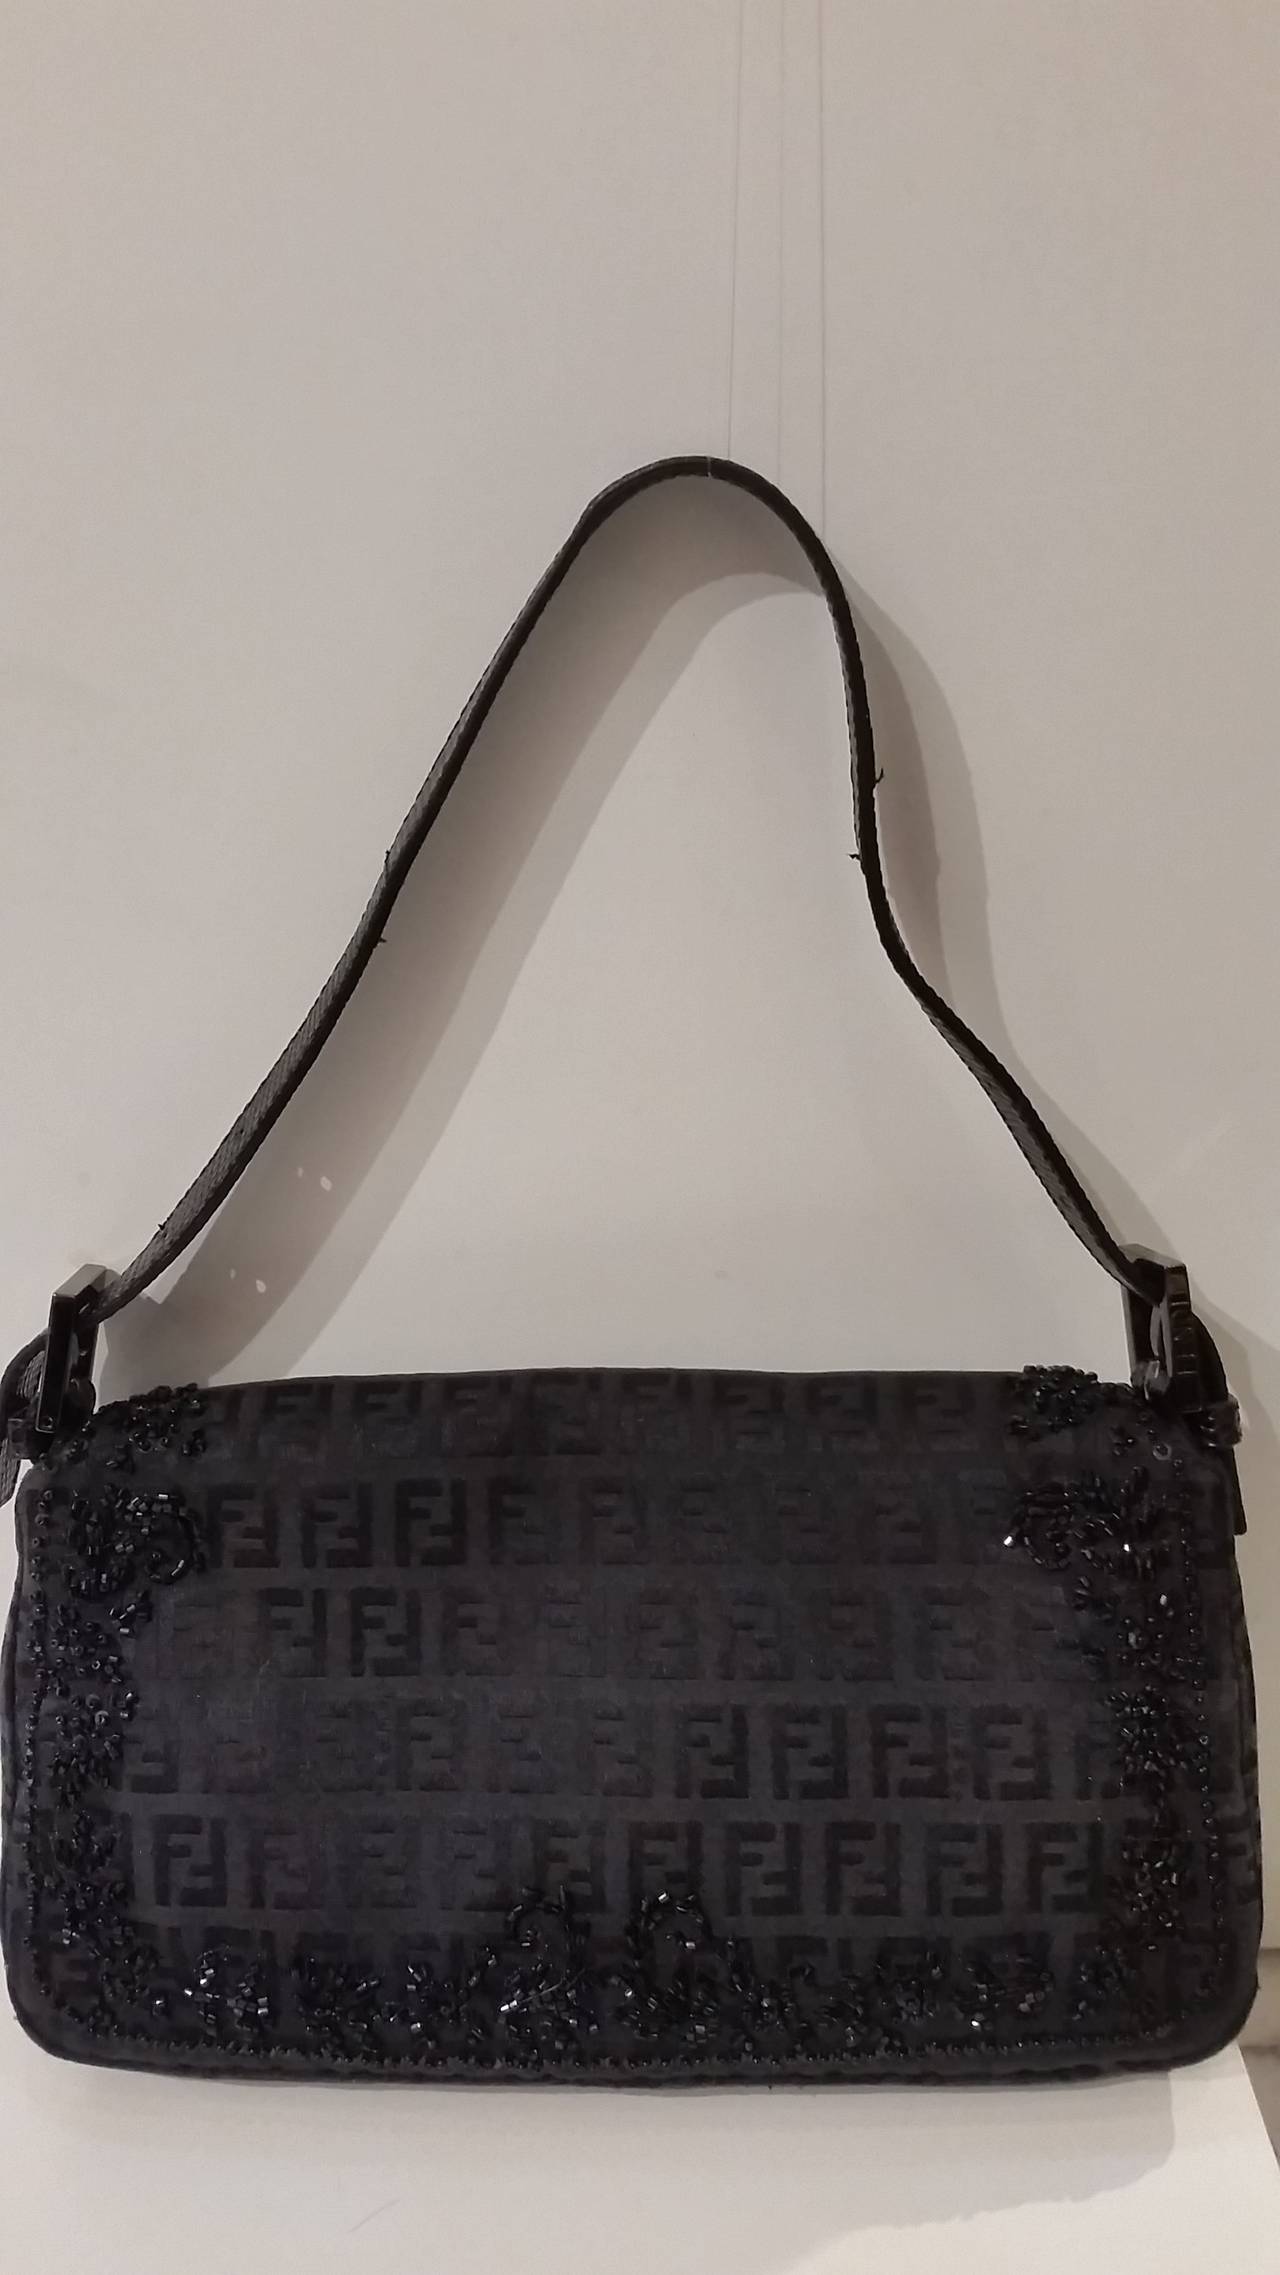 Women's 2000s Fendi baguette bag with small pearls